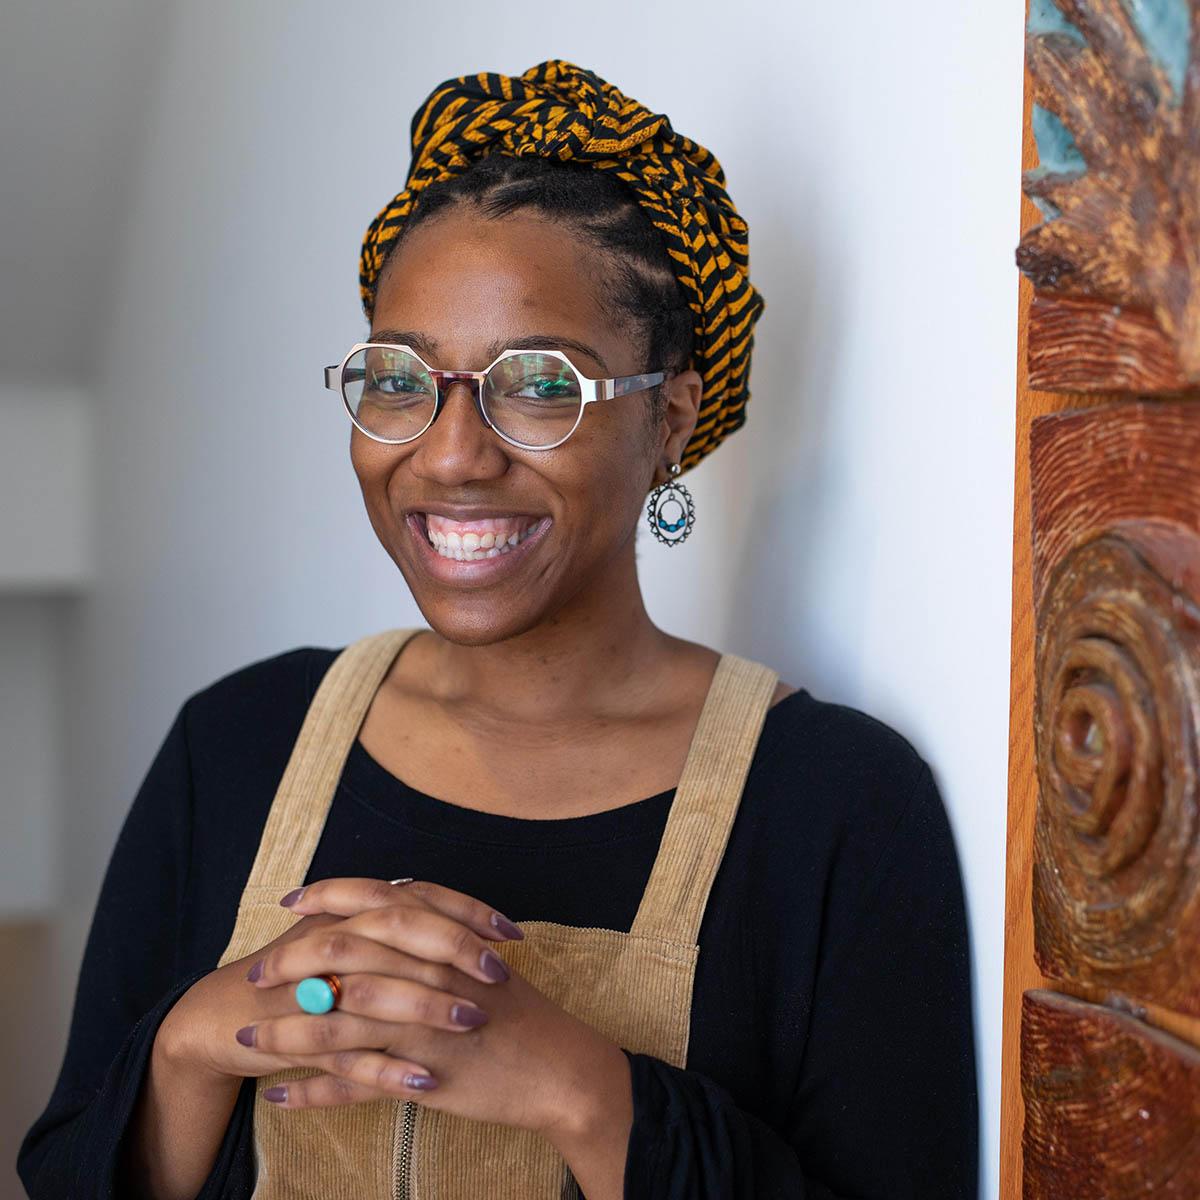 Photo of Ciera Marie Young, a Black woman with hexagonal glasses, smiling in front of a colorful painting